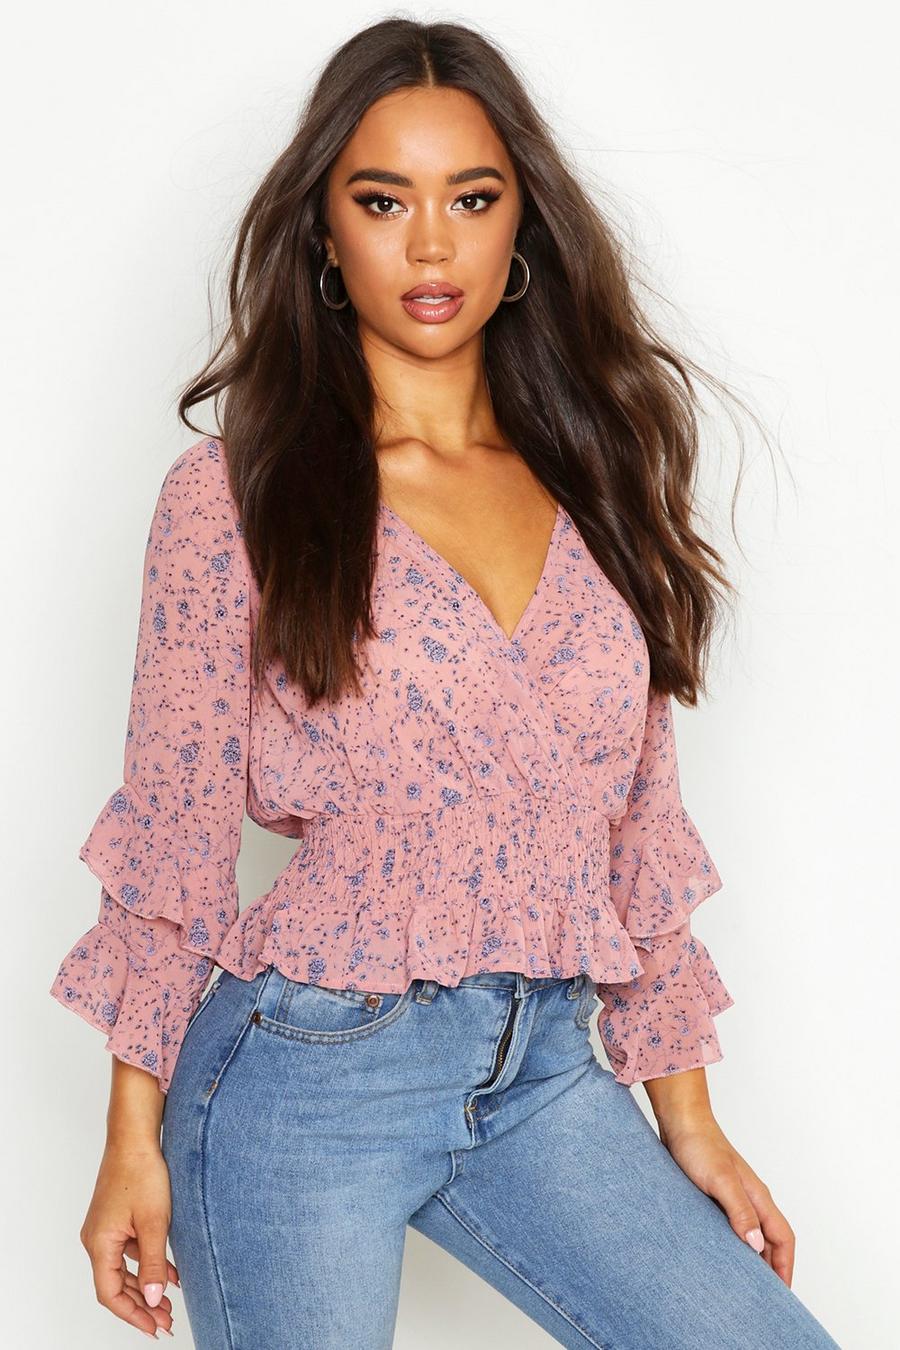 Floral Tops, Floral Blouses & Flowered Shirts